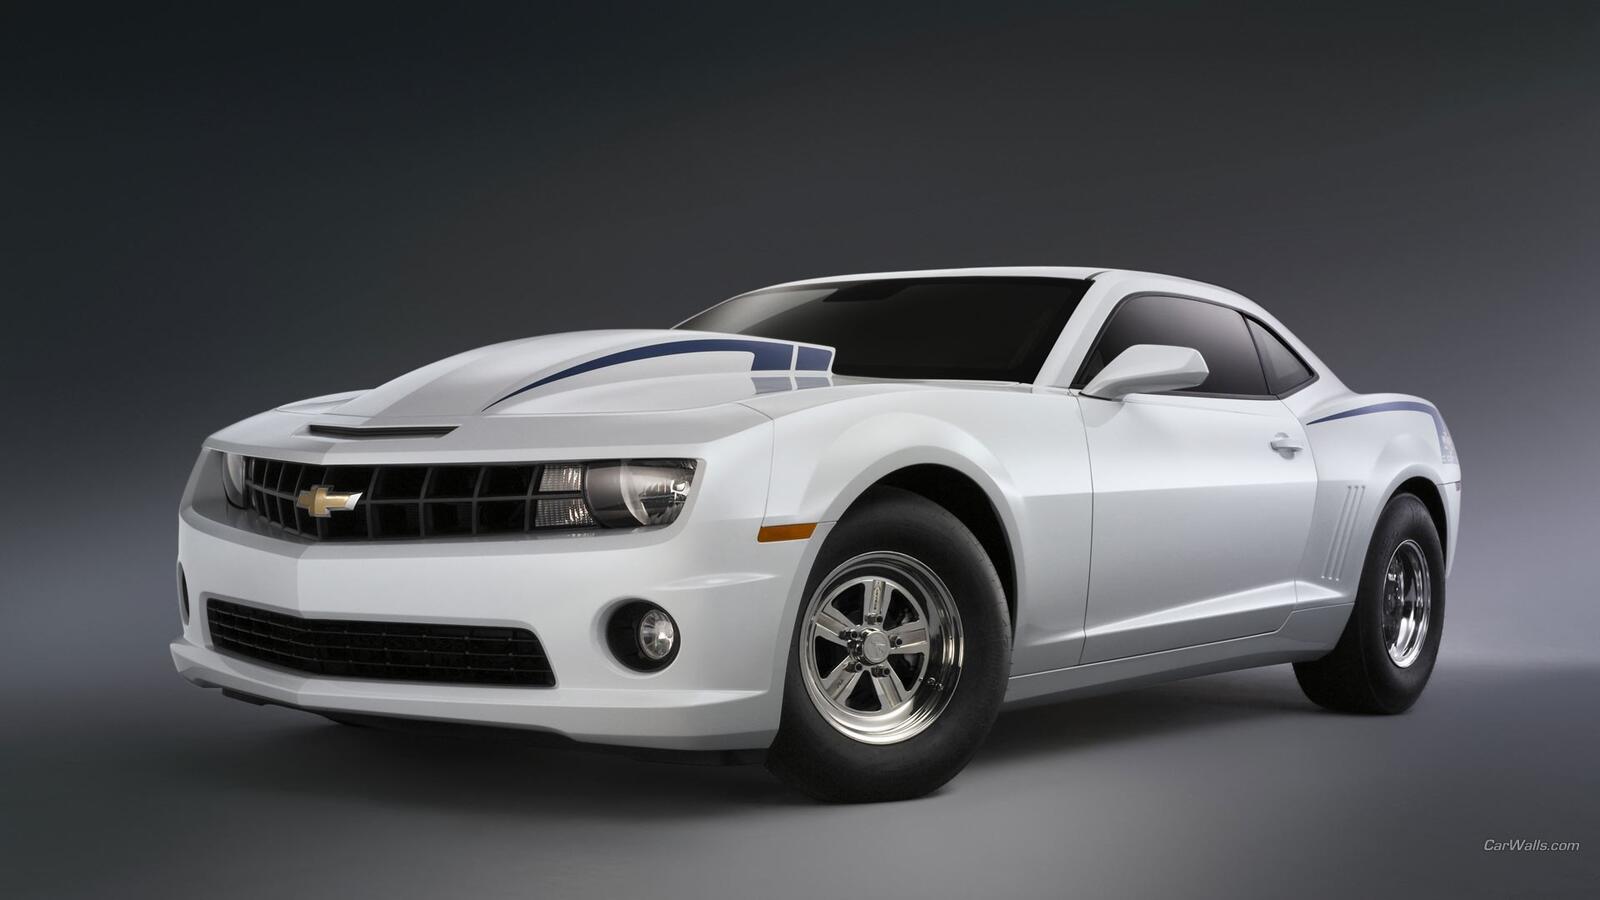 Wallpapers Chevrolet Camaro coupe sports car on the desktop